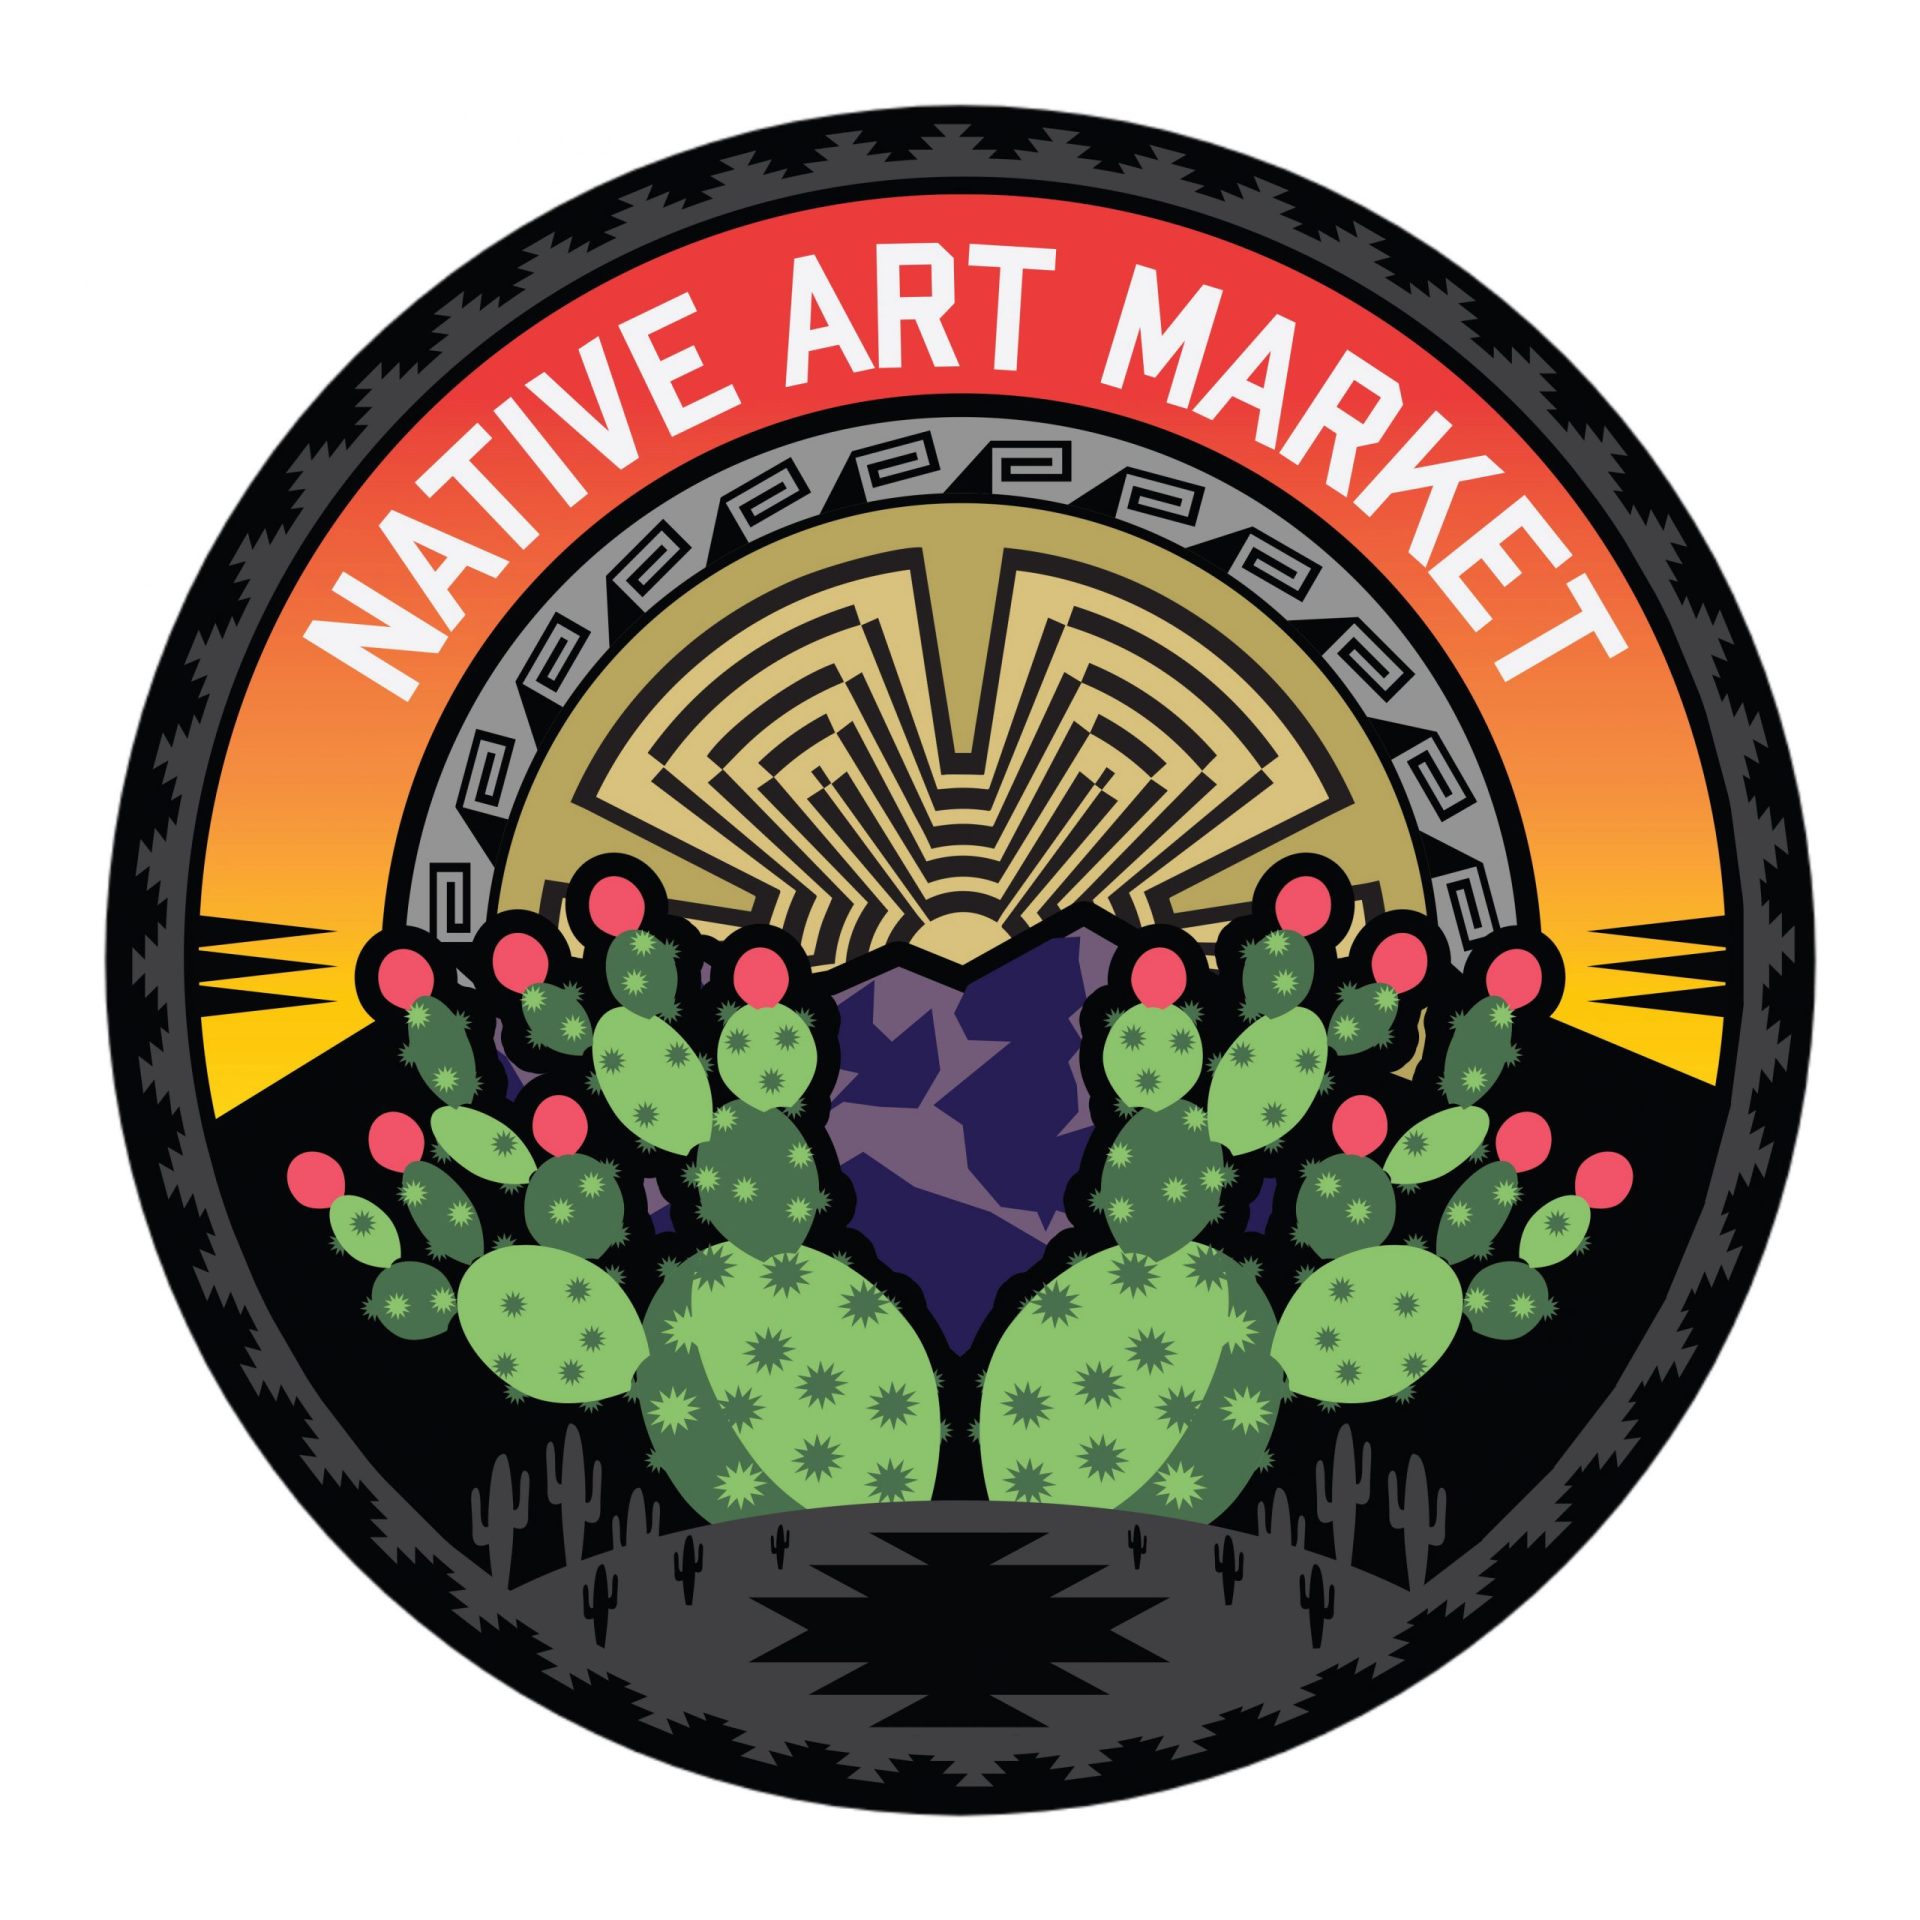 Native Art Market Named Business of the Year